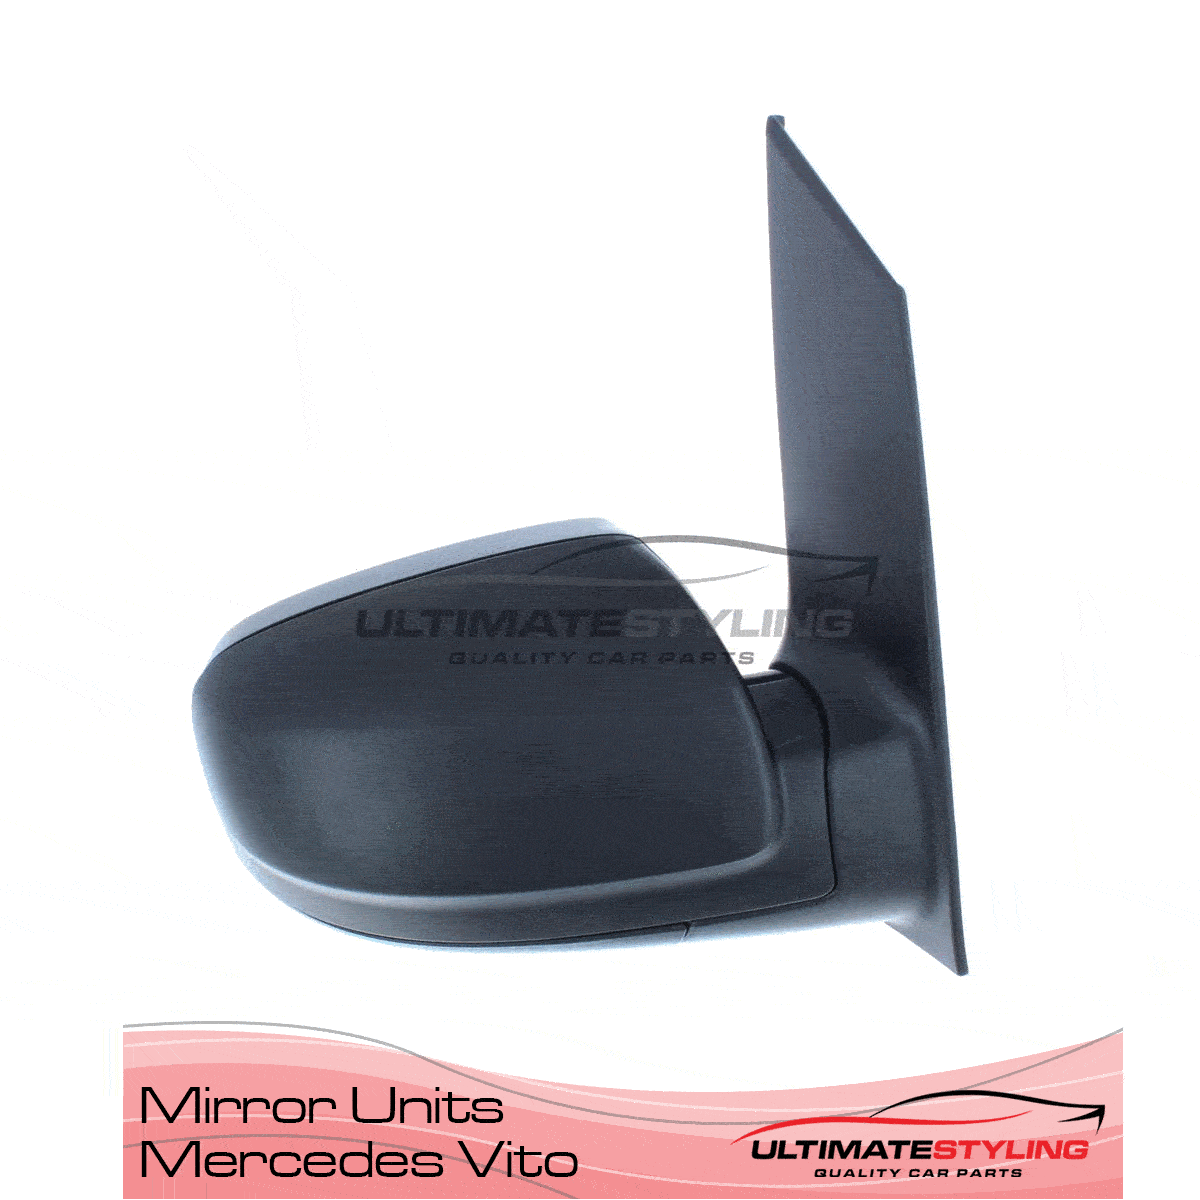 Wing mirrors for Mercedes Vito van - Ultimate Styling